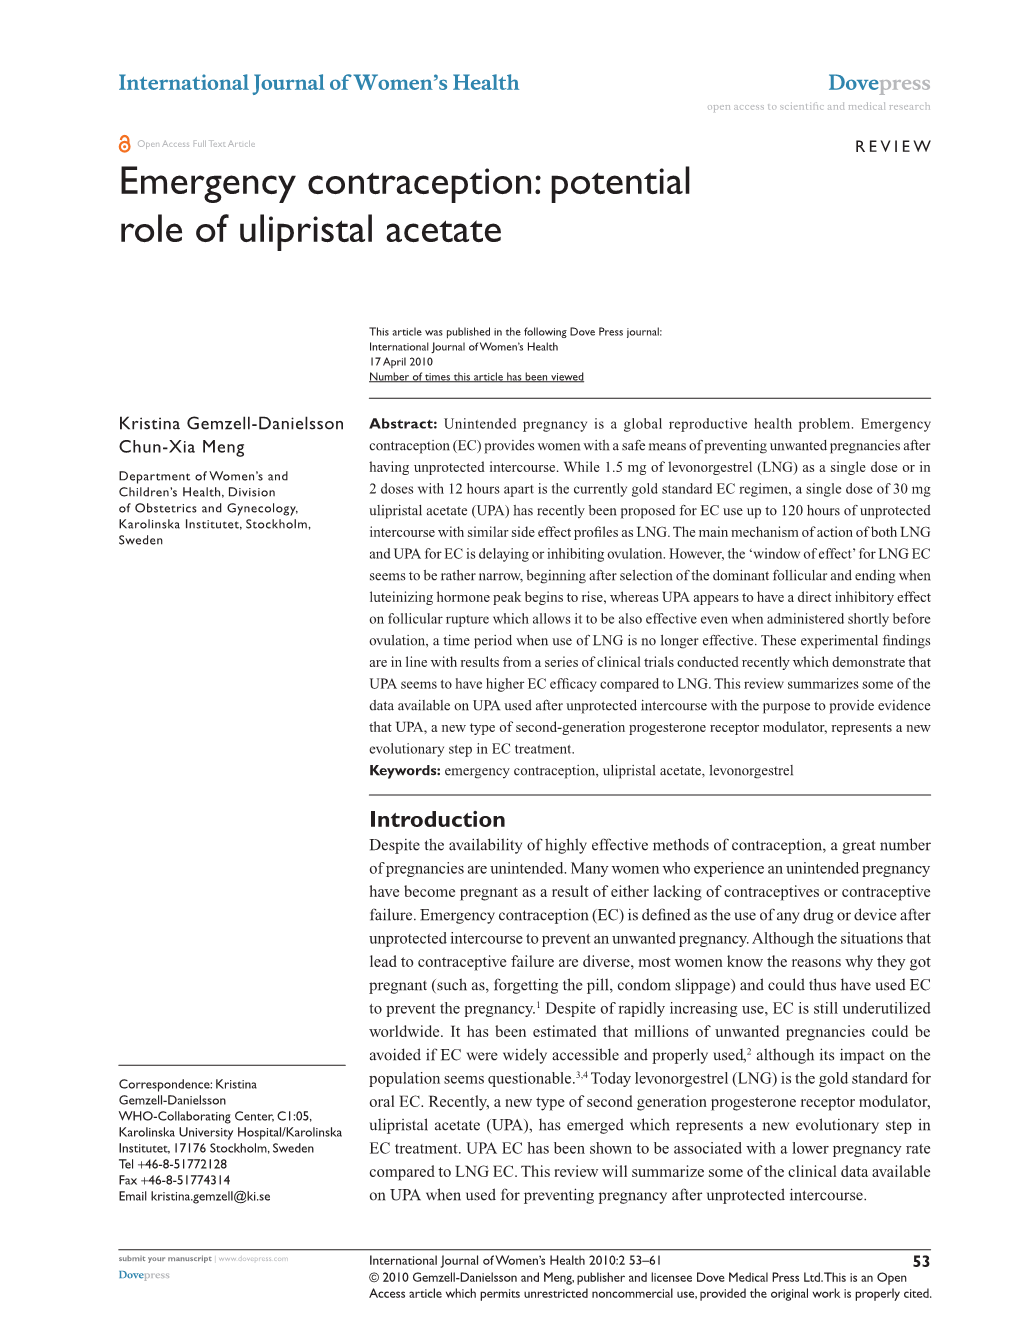 Emergency Contraception: Potential Role of Ulipristal Acetate